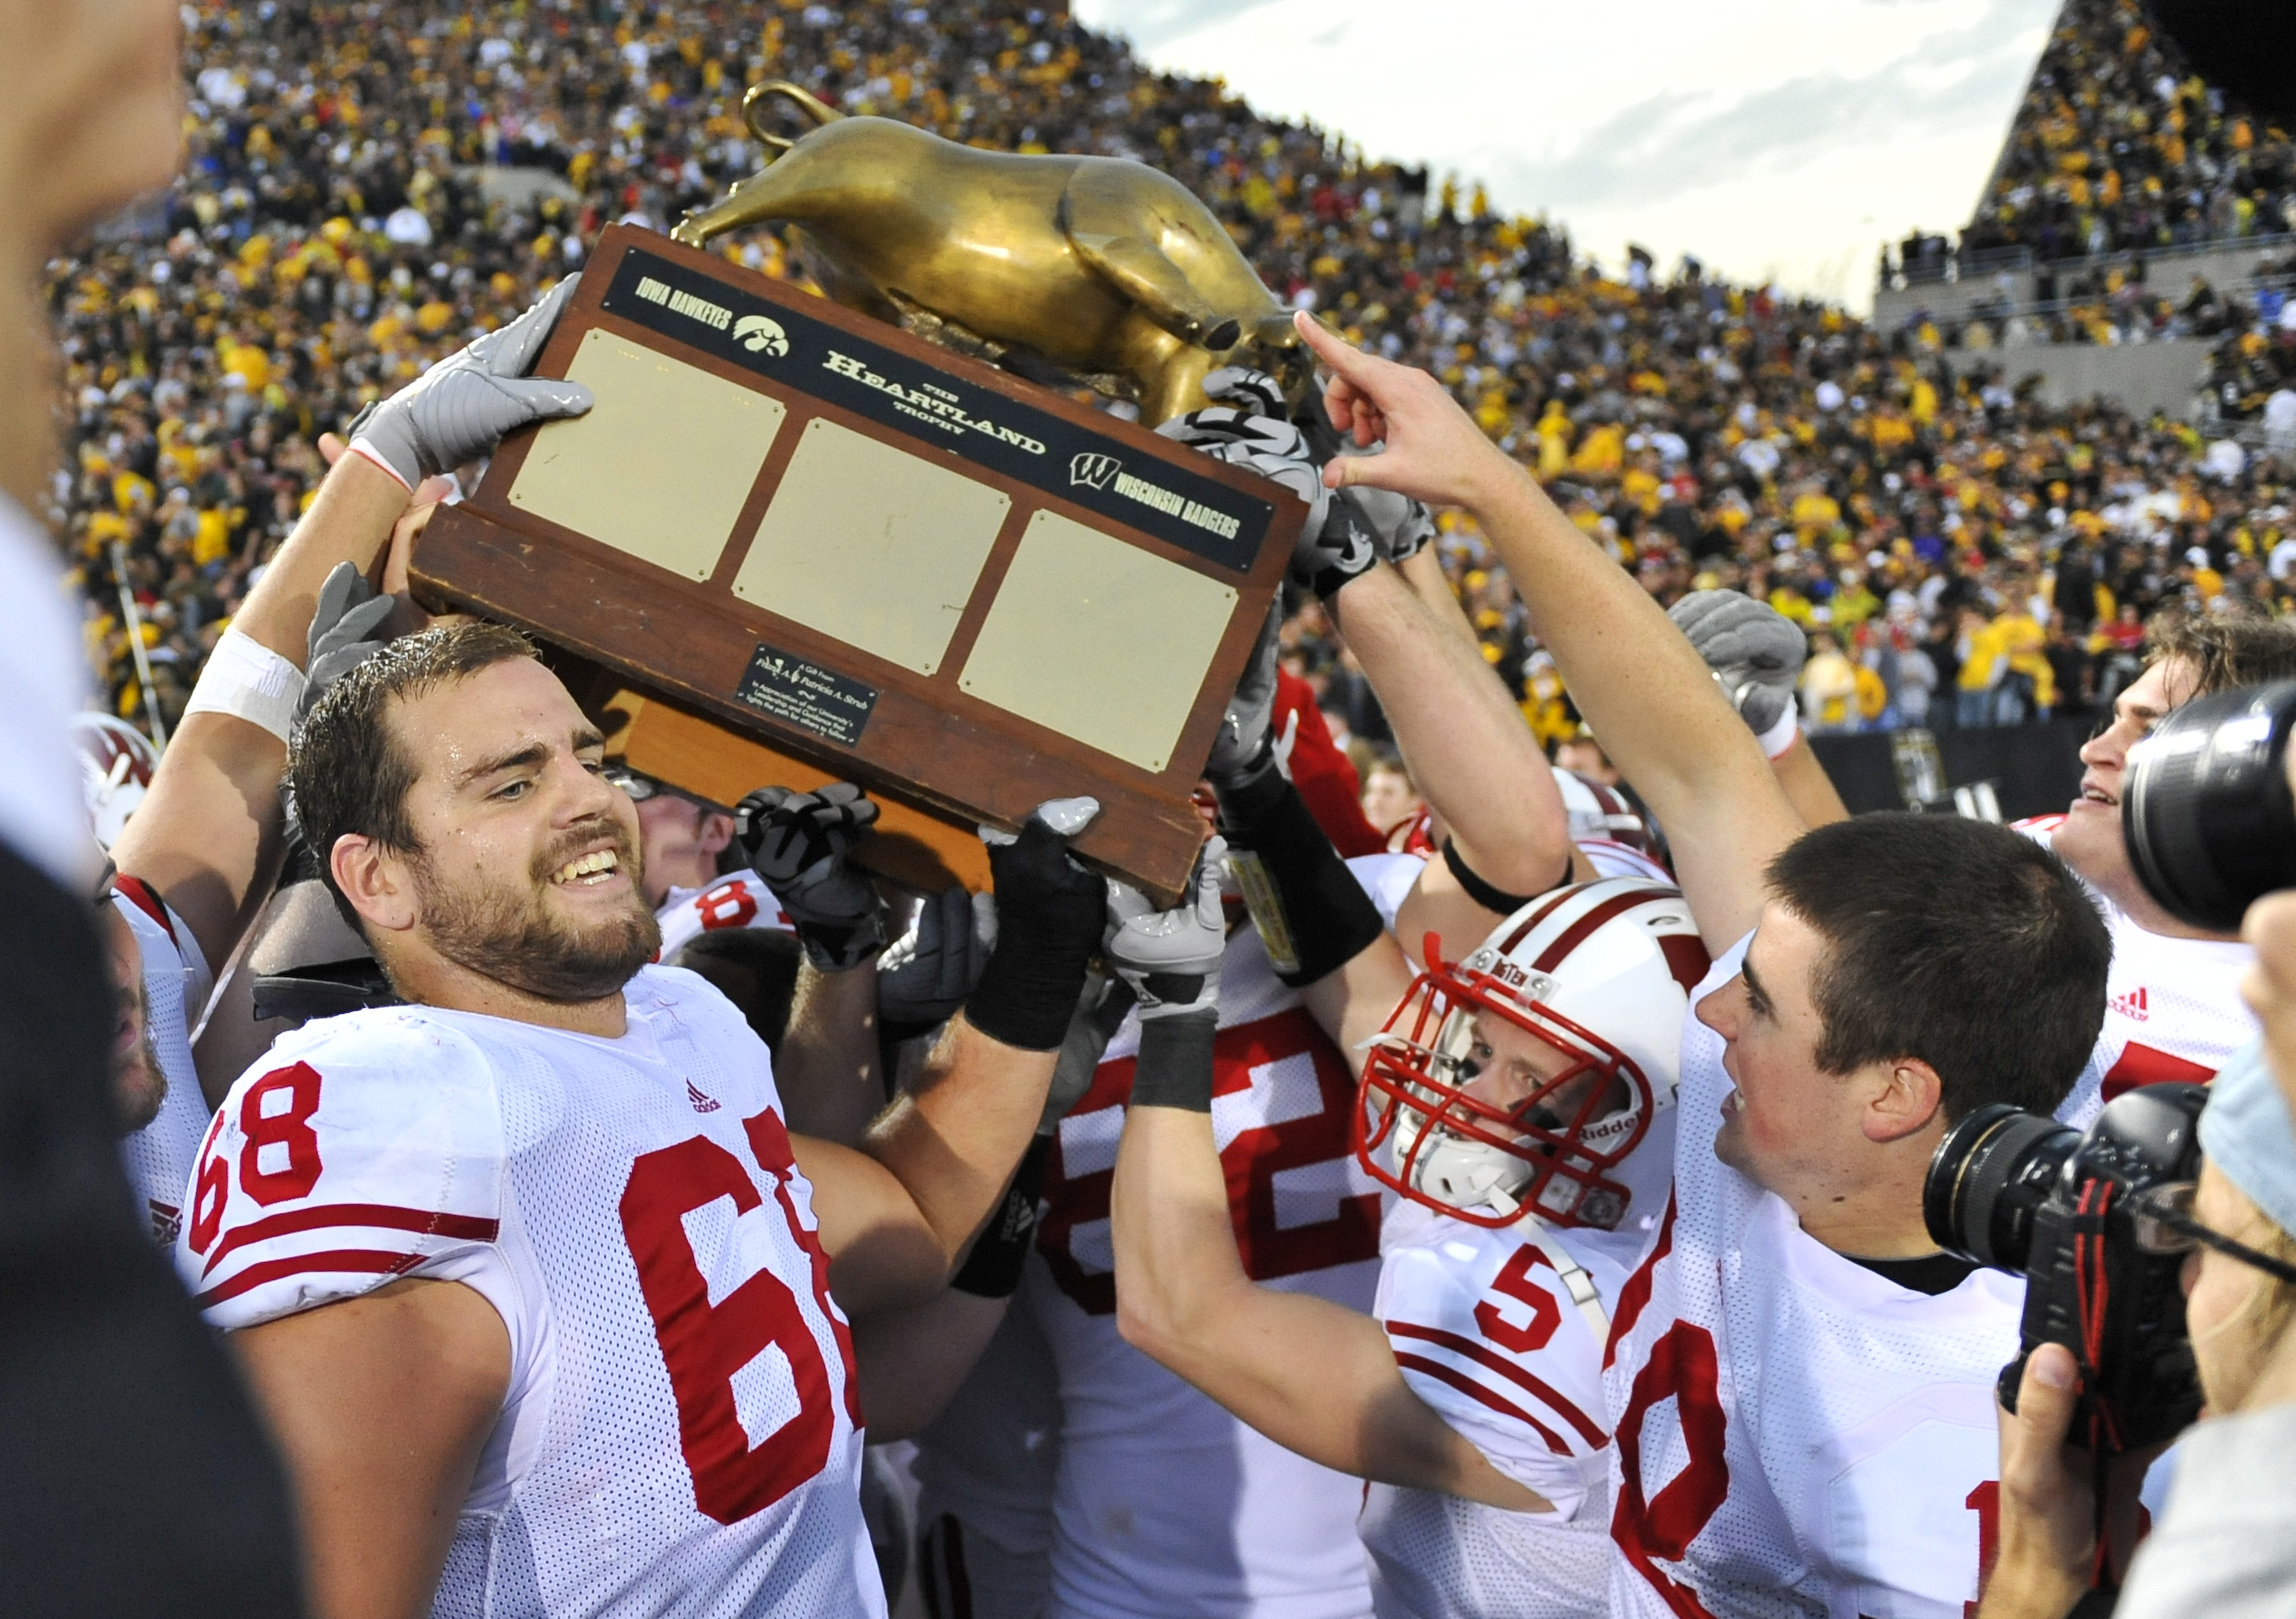 IOWA CITY, IA - OCTOBER 23: Offensive lineman Gabe Carimi #68 of the Wisconsin Badgers holds the Heartland Trophy with his teammates as they celebrate their victory of the University of Iowa Hawkeyes at Kinnick Stadium on October 23, 2010 in Iowa City, Io